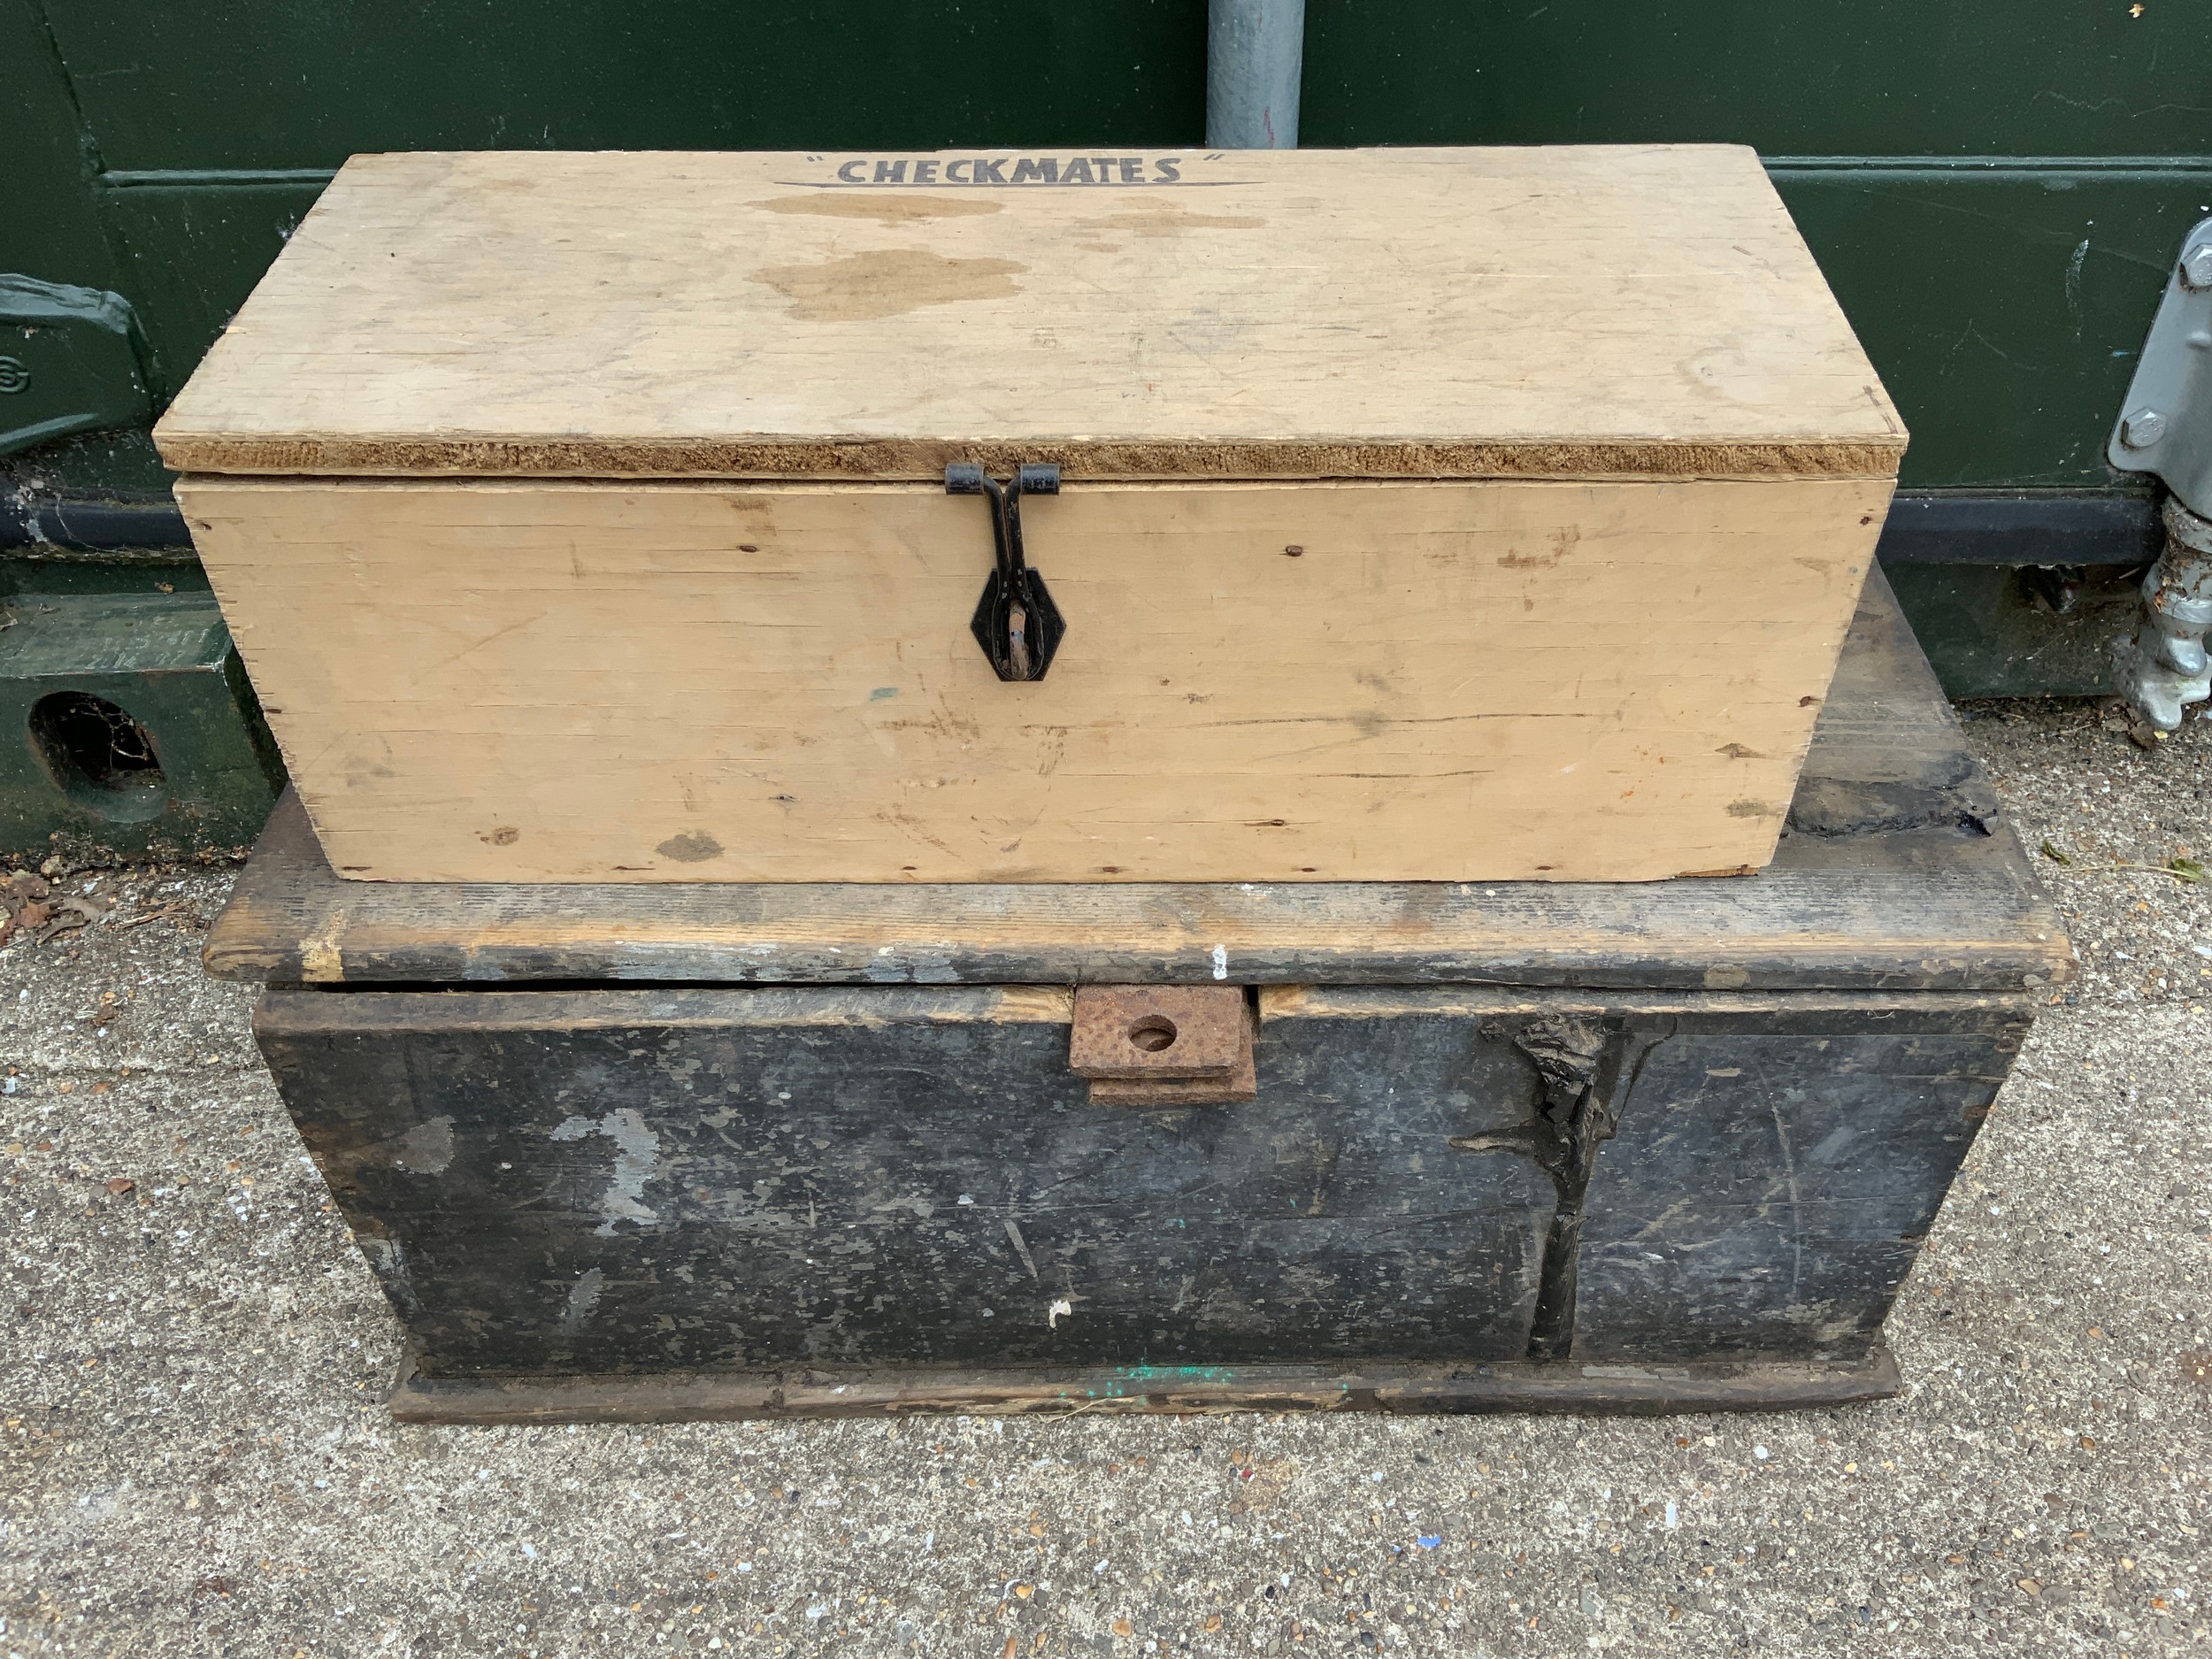 2x Wooden Boxes, One with Contents - Shoe Last and Vintage Planes - Image 2 of 2